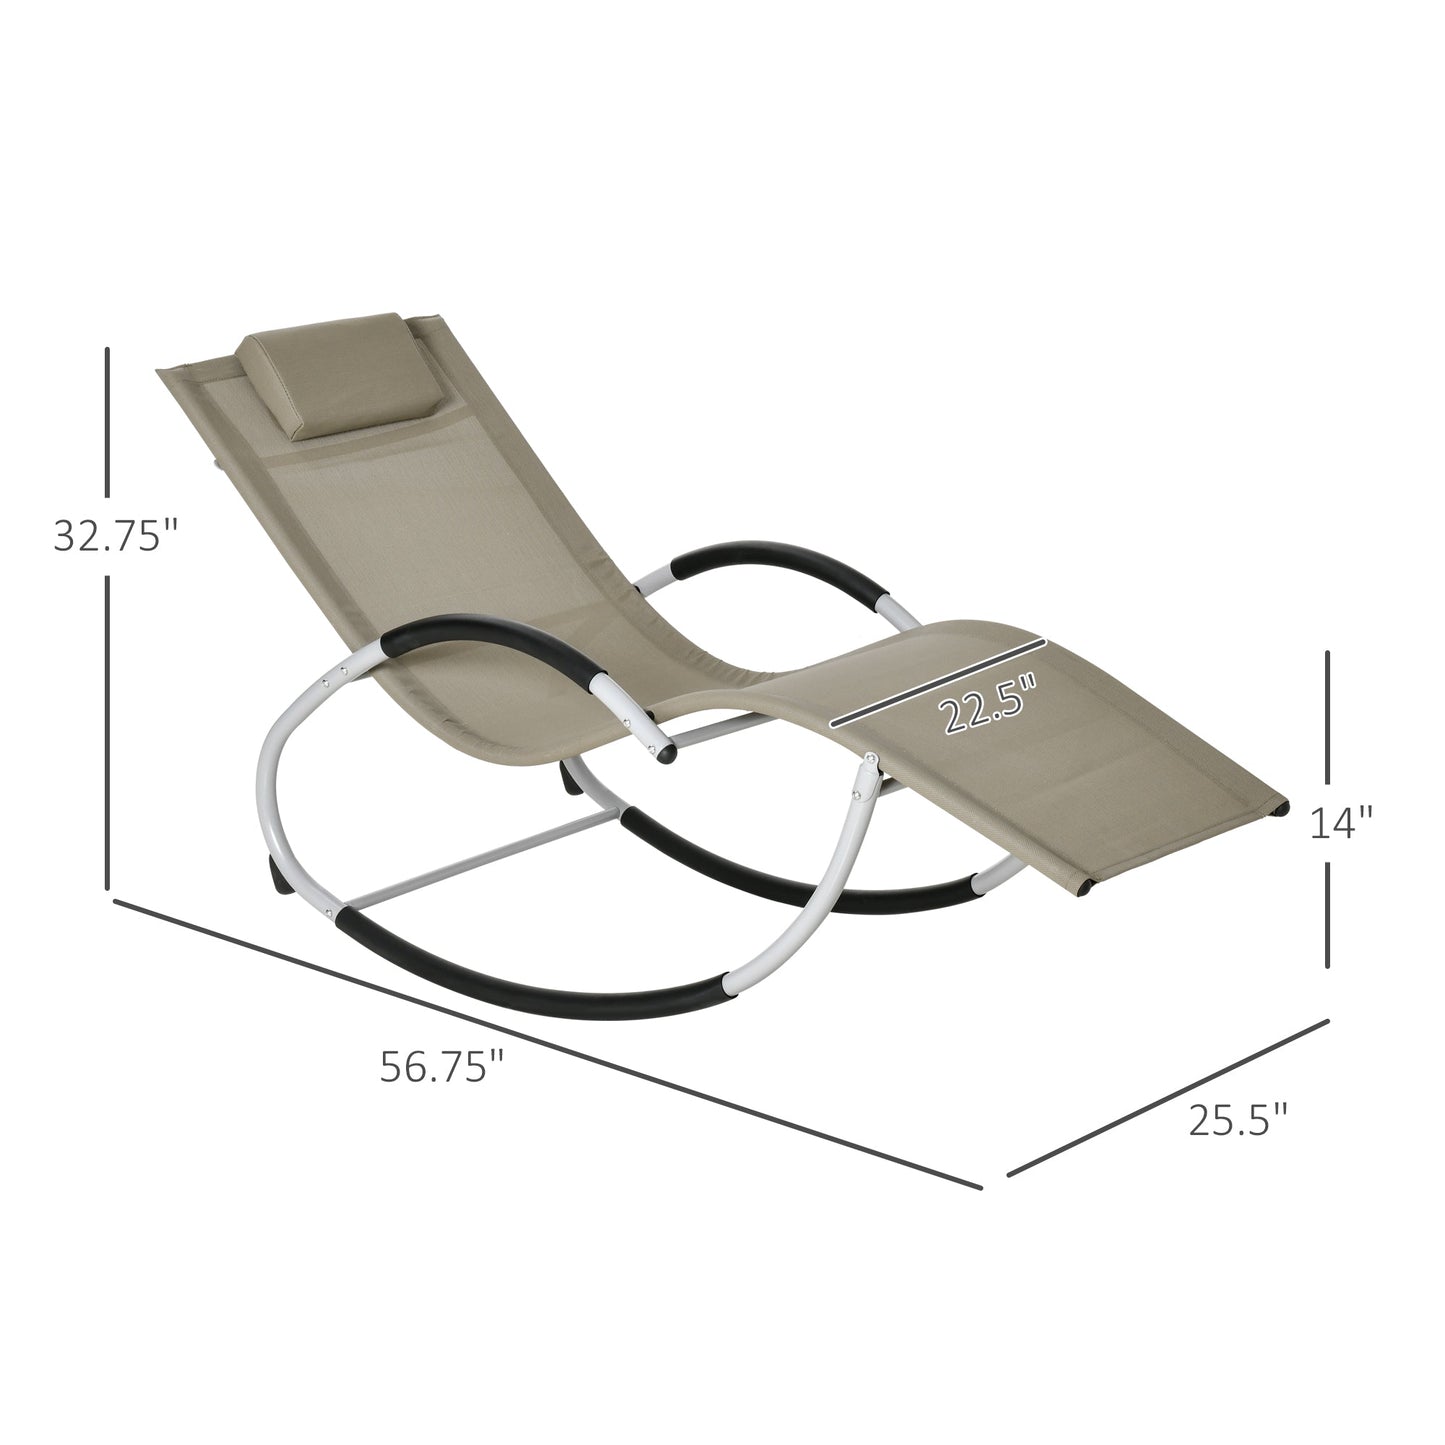 Outdoor and Garden-Rocking Chair, Zero Gravity Patio Chaise Garden Sun Lounger, Outdoor Reclining Rocker with Detachable Pillow for Lawn, Patio or Pool, Sand - Outdoor Style Company